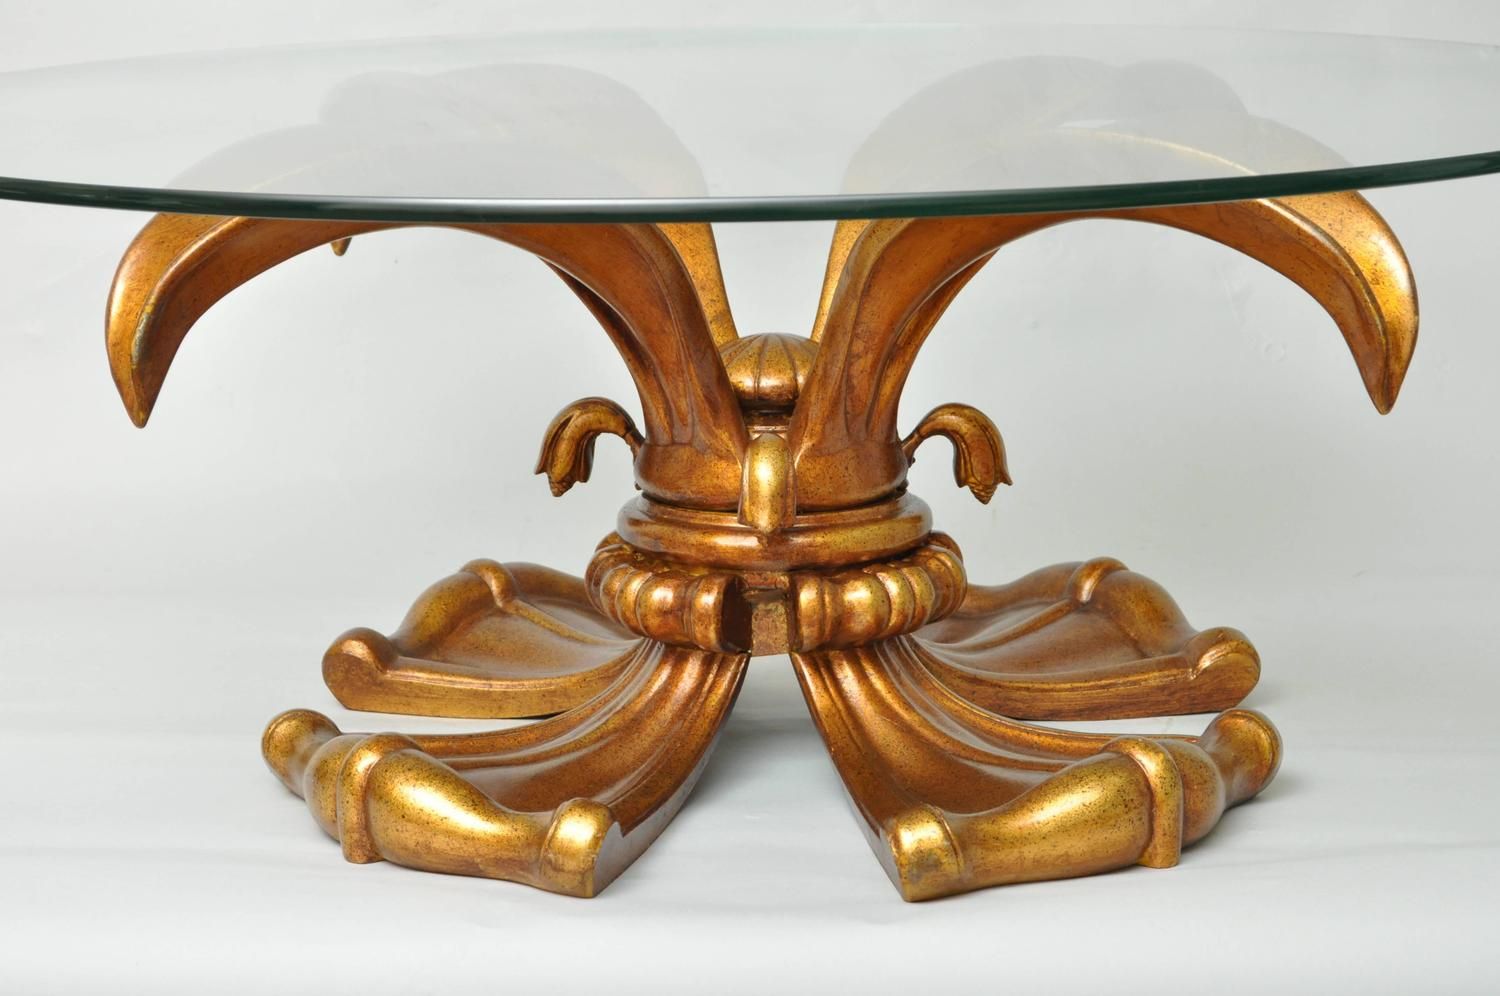 Vintage Hollywood Regency Gold Lotus Lily Round Coffee Regarding Antique Gold Aluminum Coffee Tables (View 12 of 15)